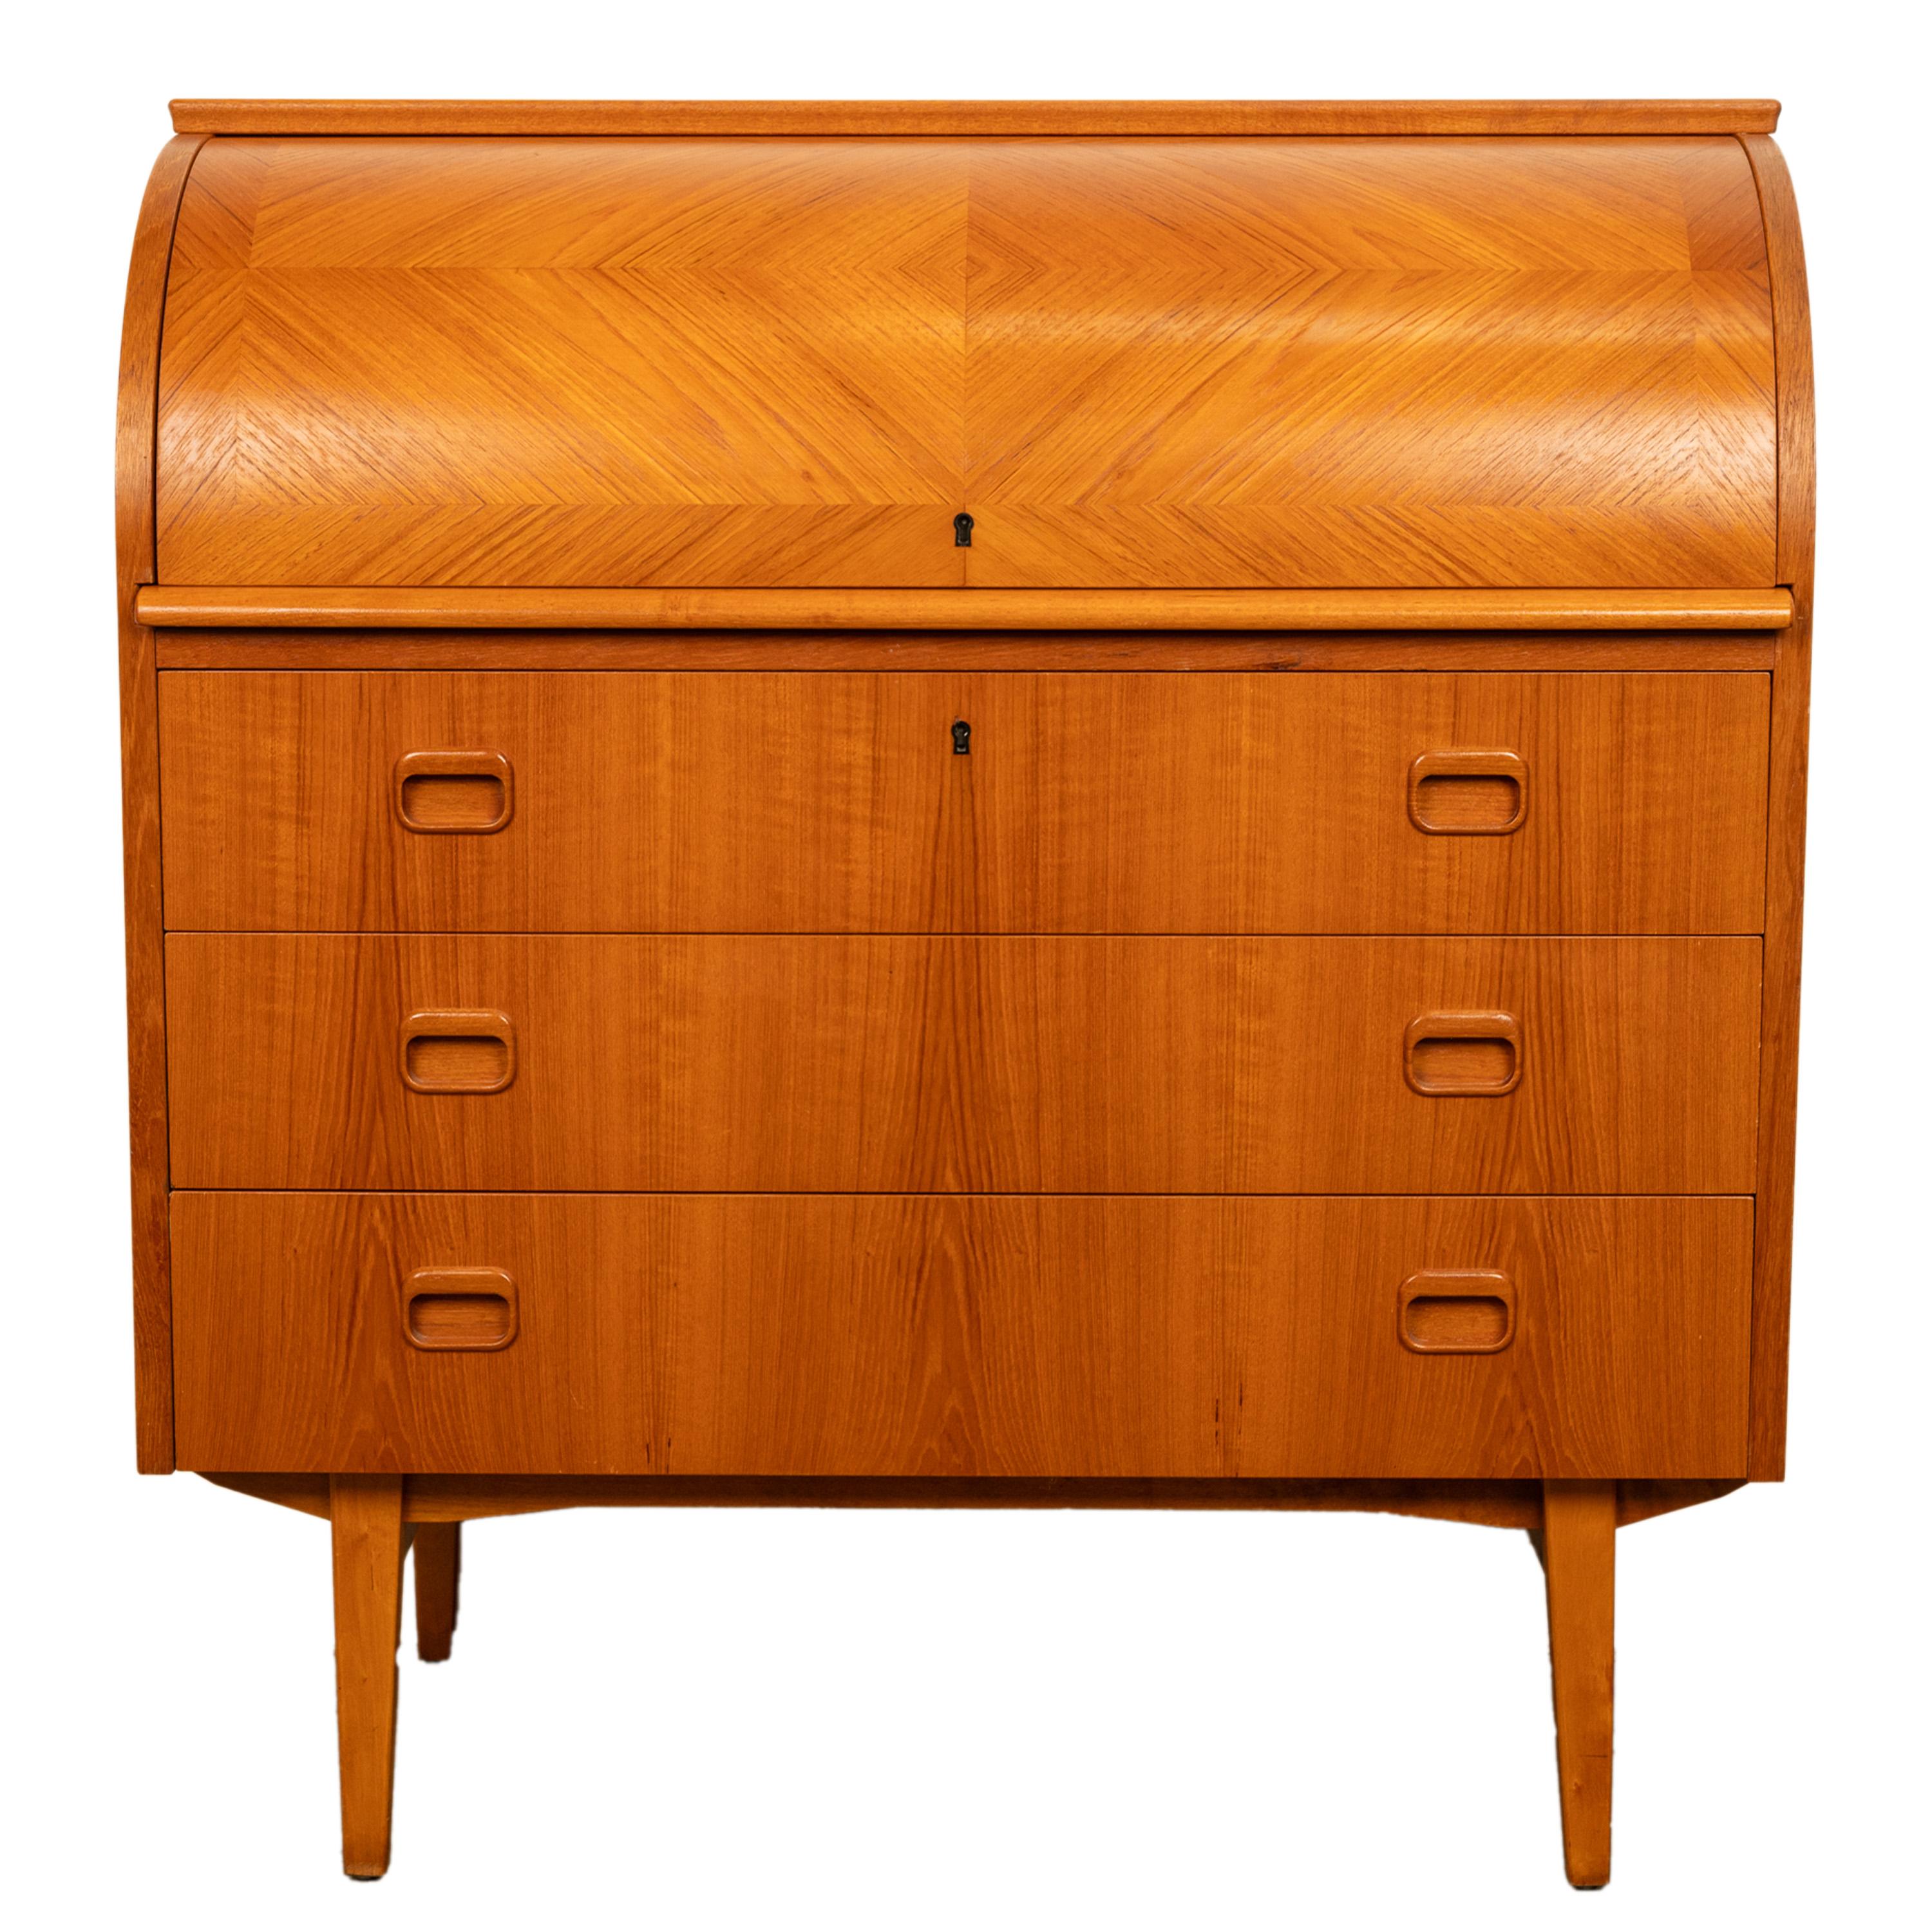 A good Mid Century Modern roll top cylinder desk bureau, circa 1968.
The desk with a locking roll top cylinder, that is cross-banded with teak, the interior is fitted with a single drawer and seven file/pigeon holes. Below are three drawers with